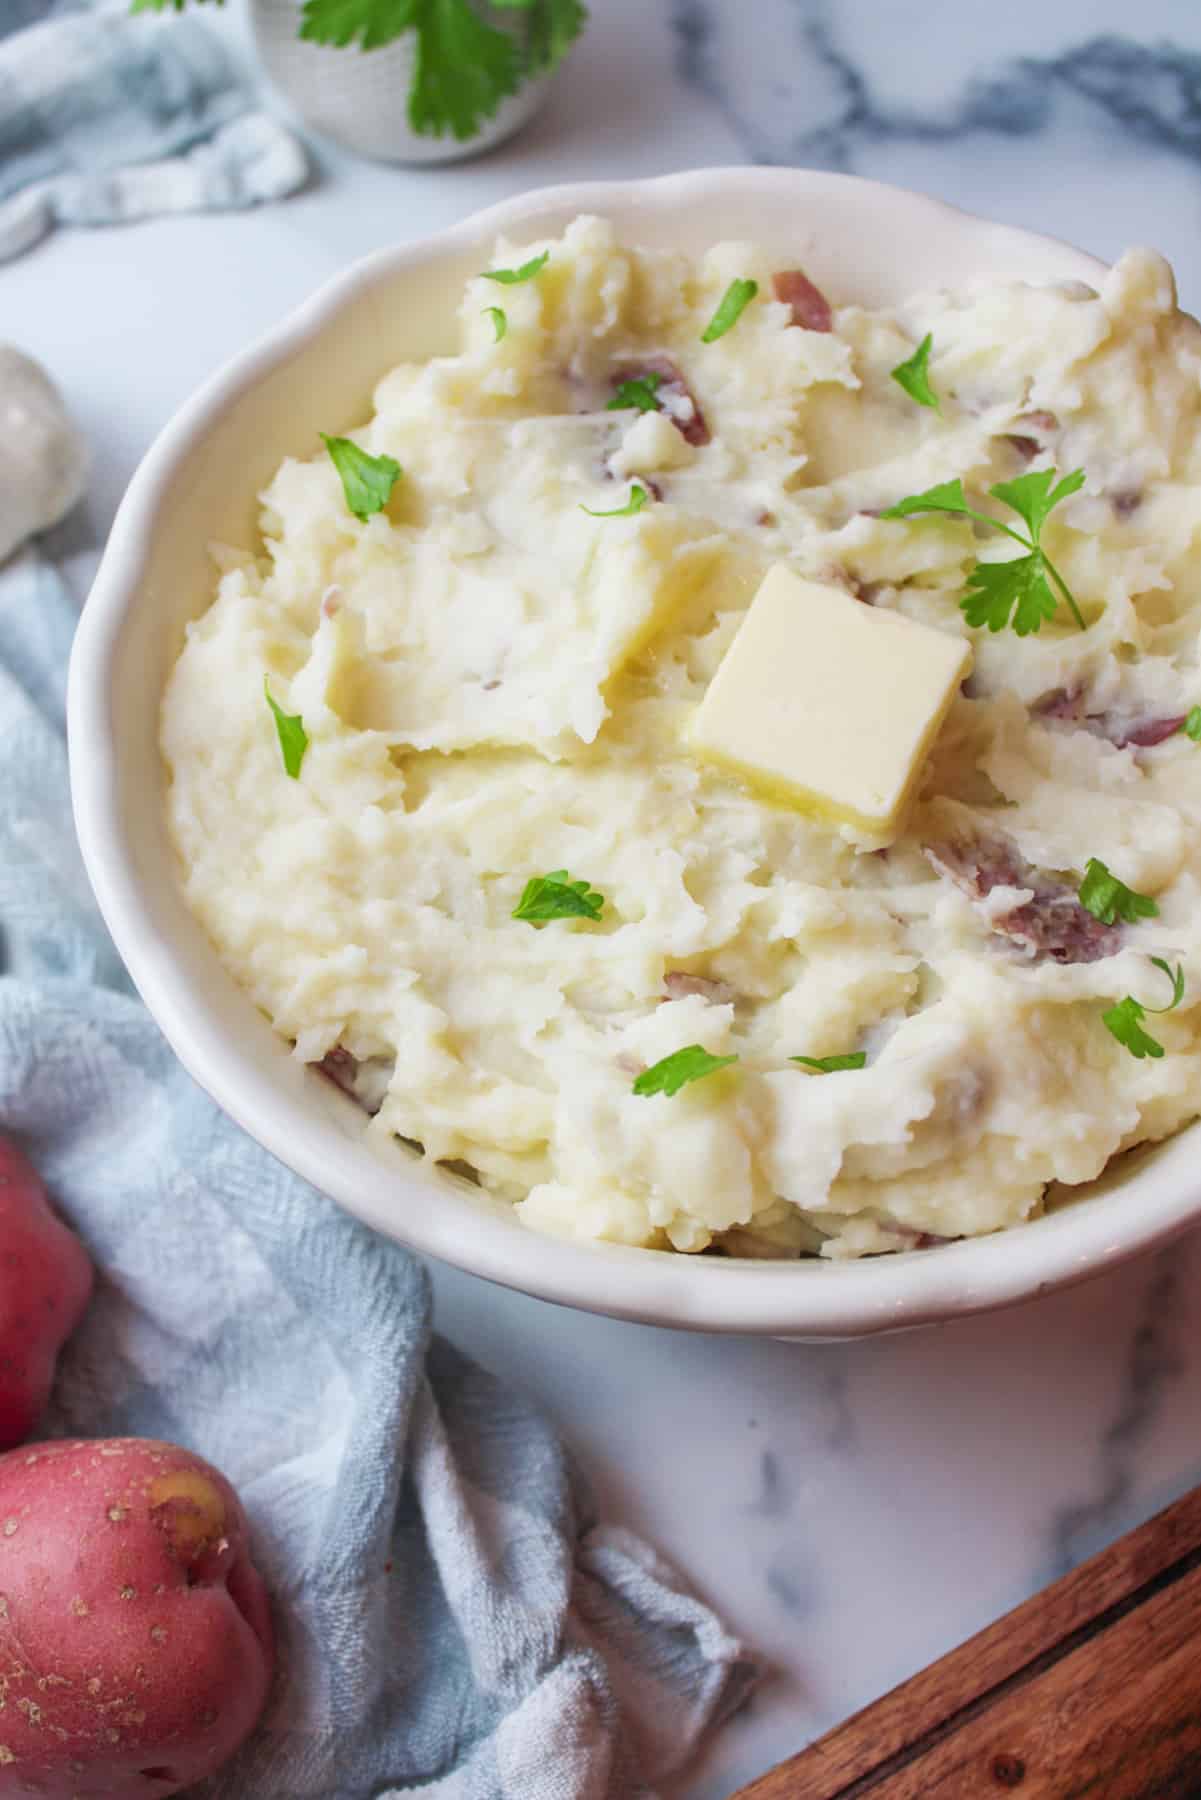 a bowl of creamy mashed potatoes with a pad of butter on top and some raw red potatoes to the side